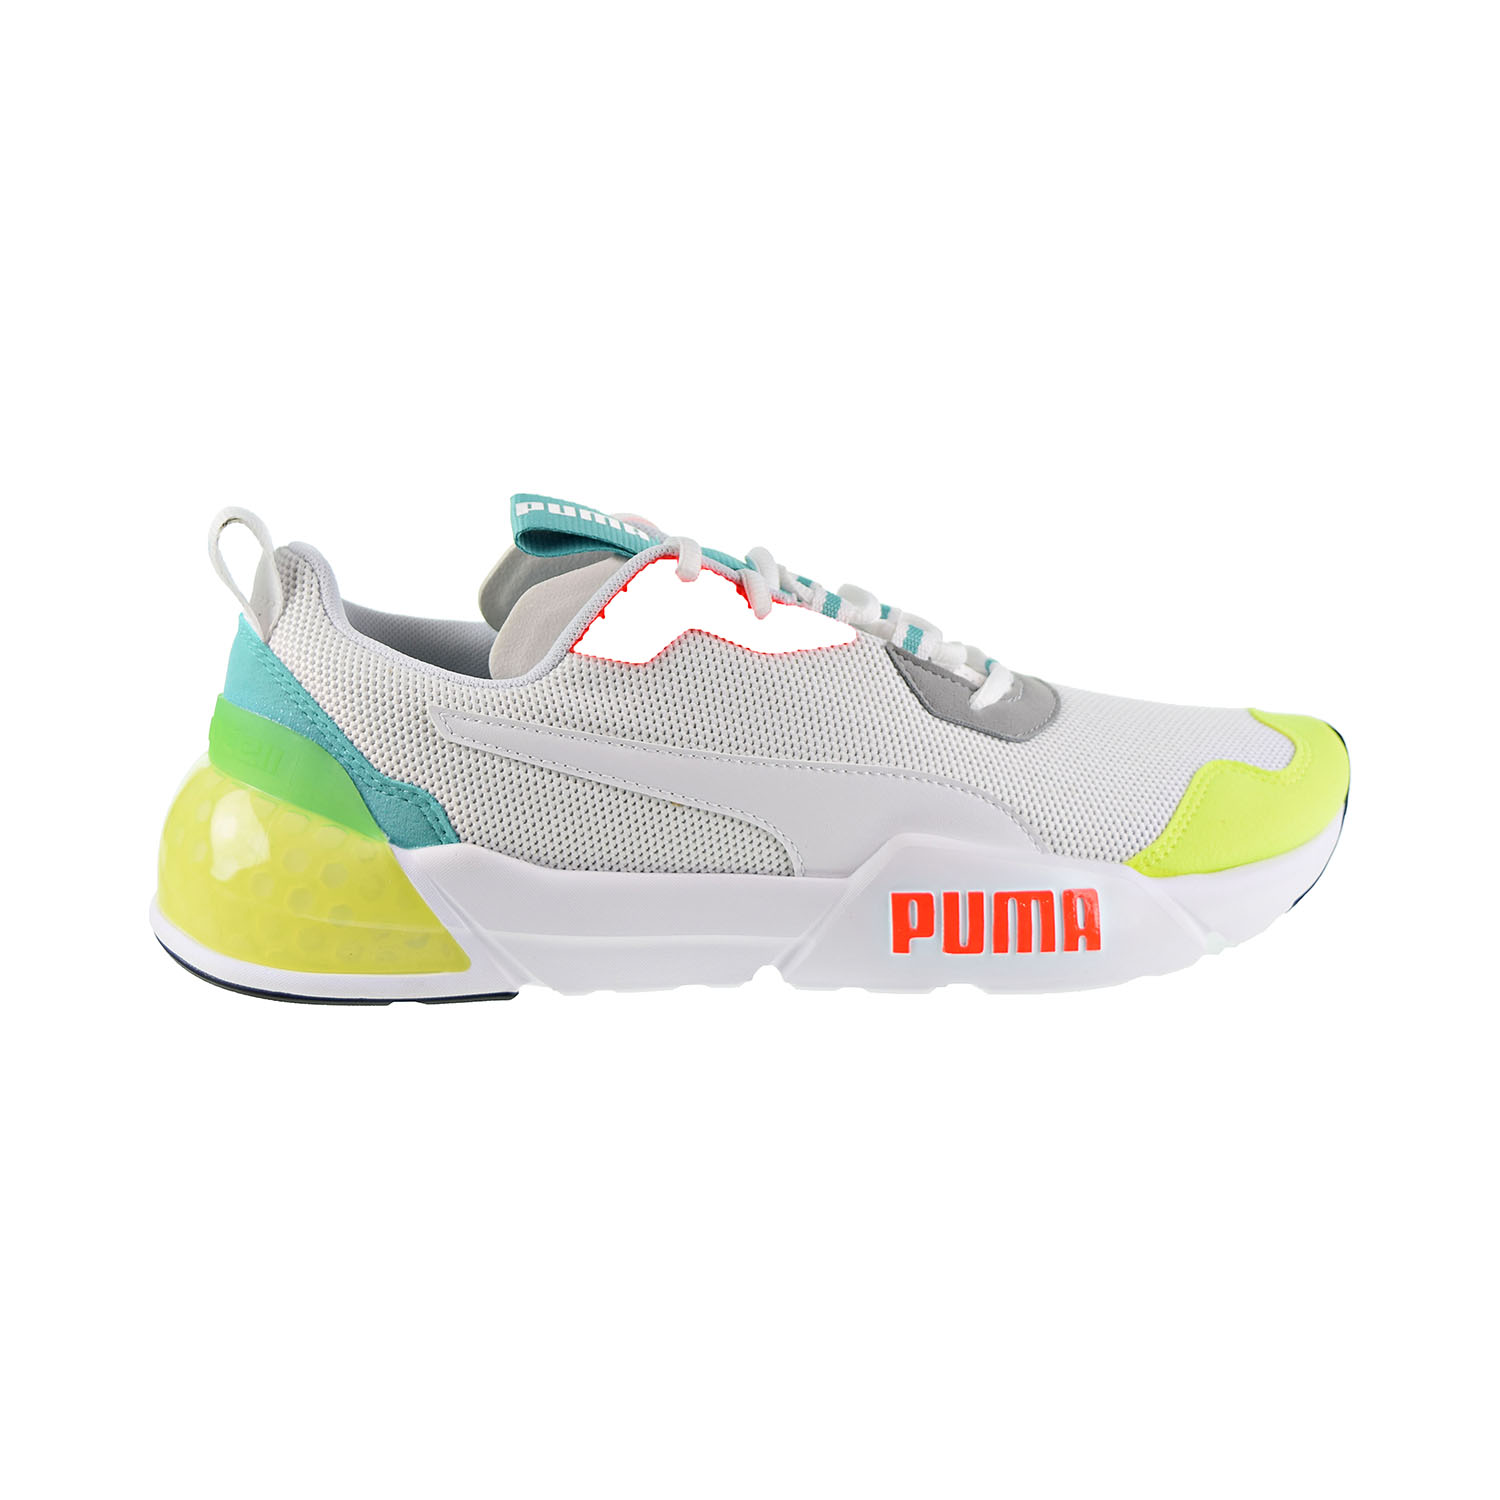 Puma Cell Phanton Men's Shoes White/Turquoise/Red 192939-04 - image 1 of 6